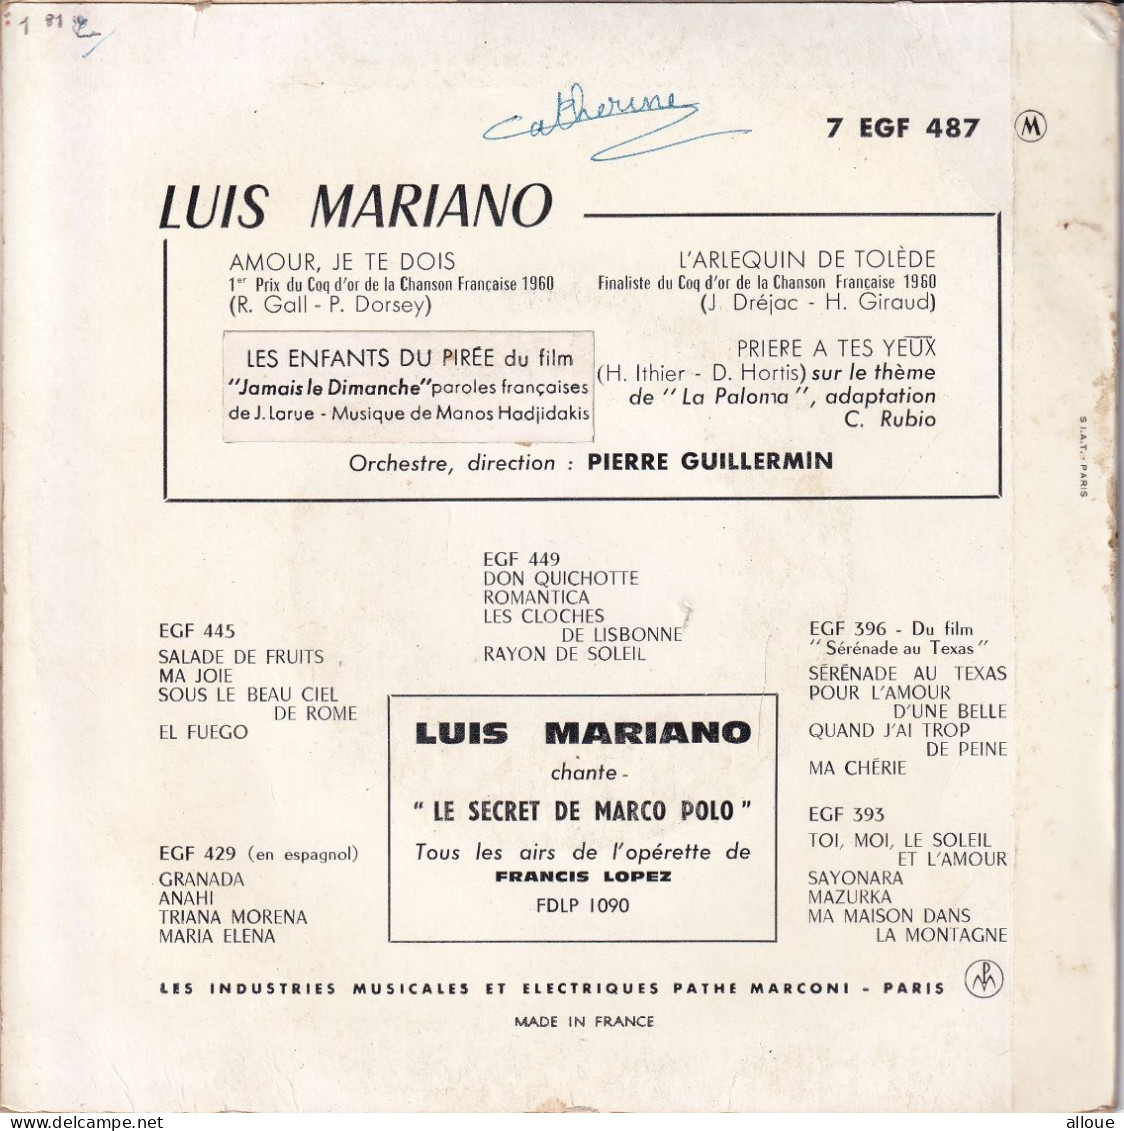 LUIS MARIANO  - FR EP -AMOUR JE TE DOIS + 3 - Opera